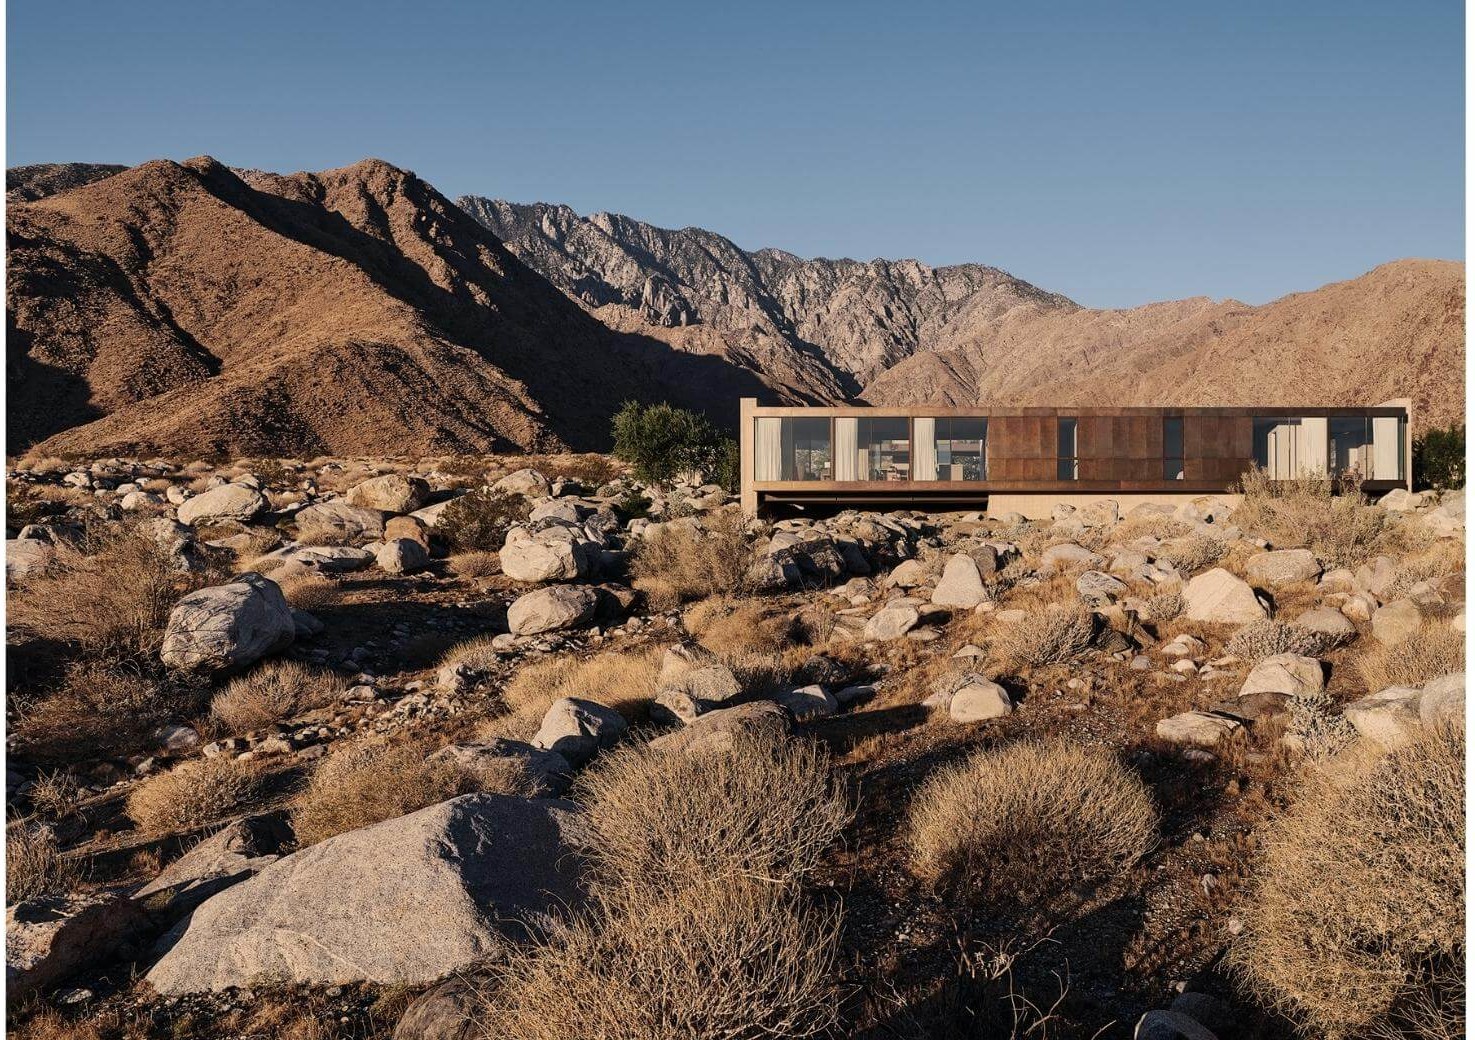 a modenrist home in the desert